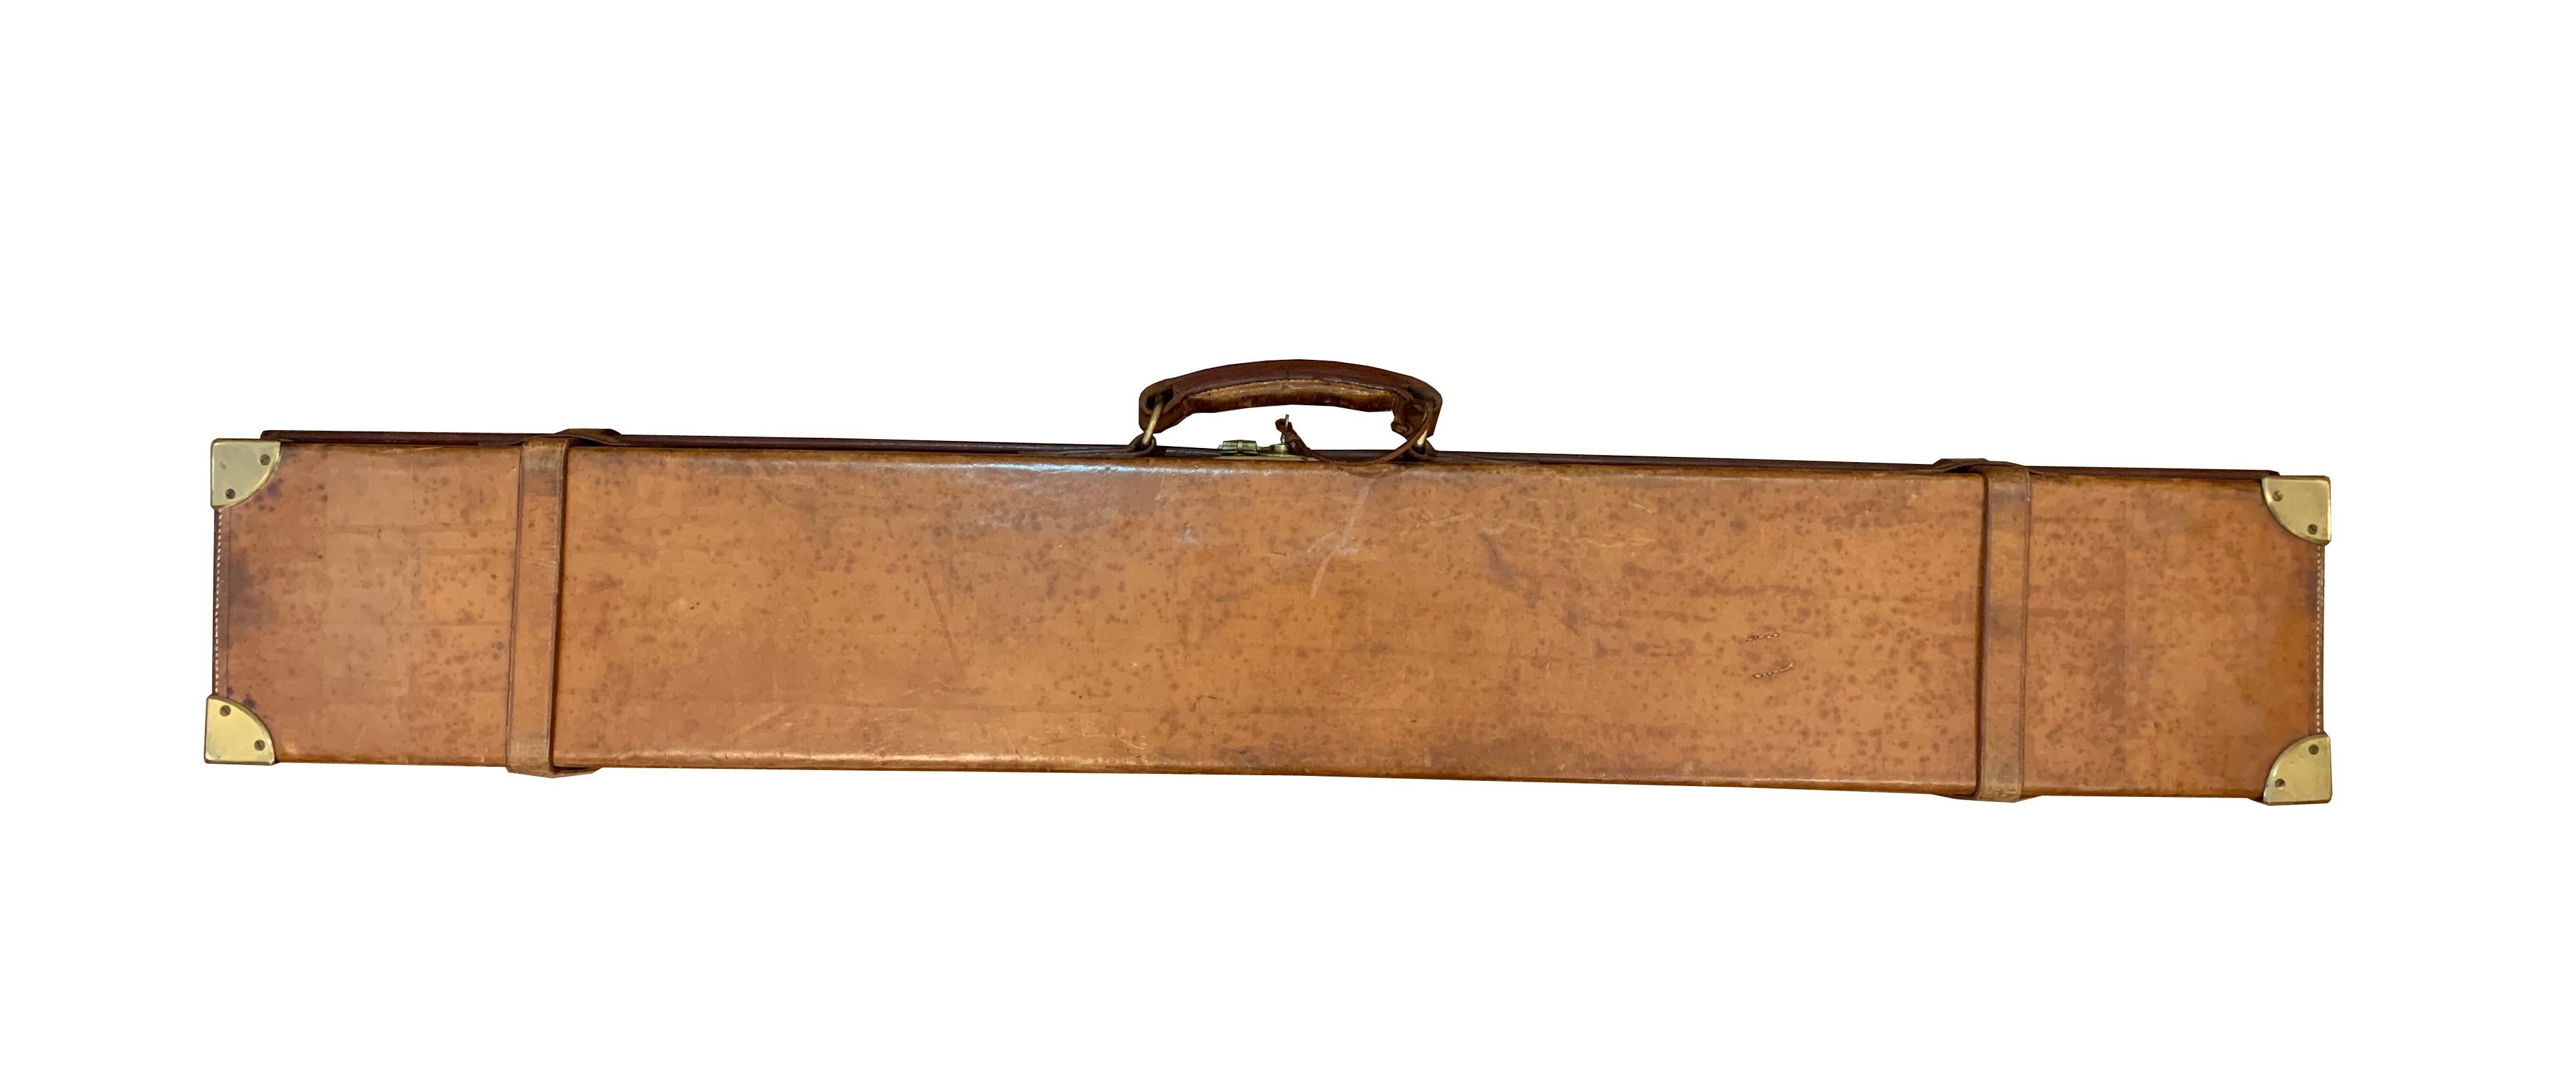 Early 20th Century Edwardian Leather over Oak Rifle or Hunting Gun Case Irish Guards For Sale